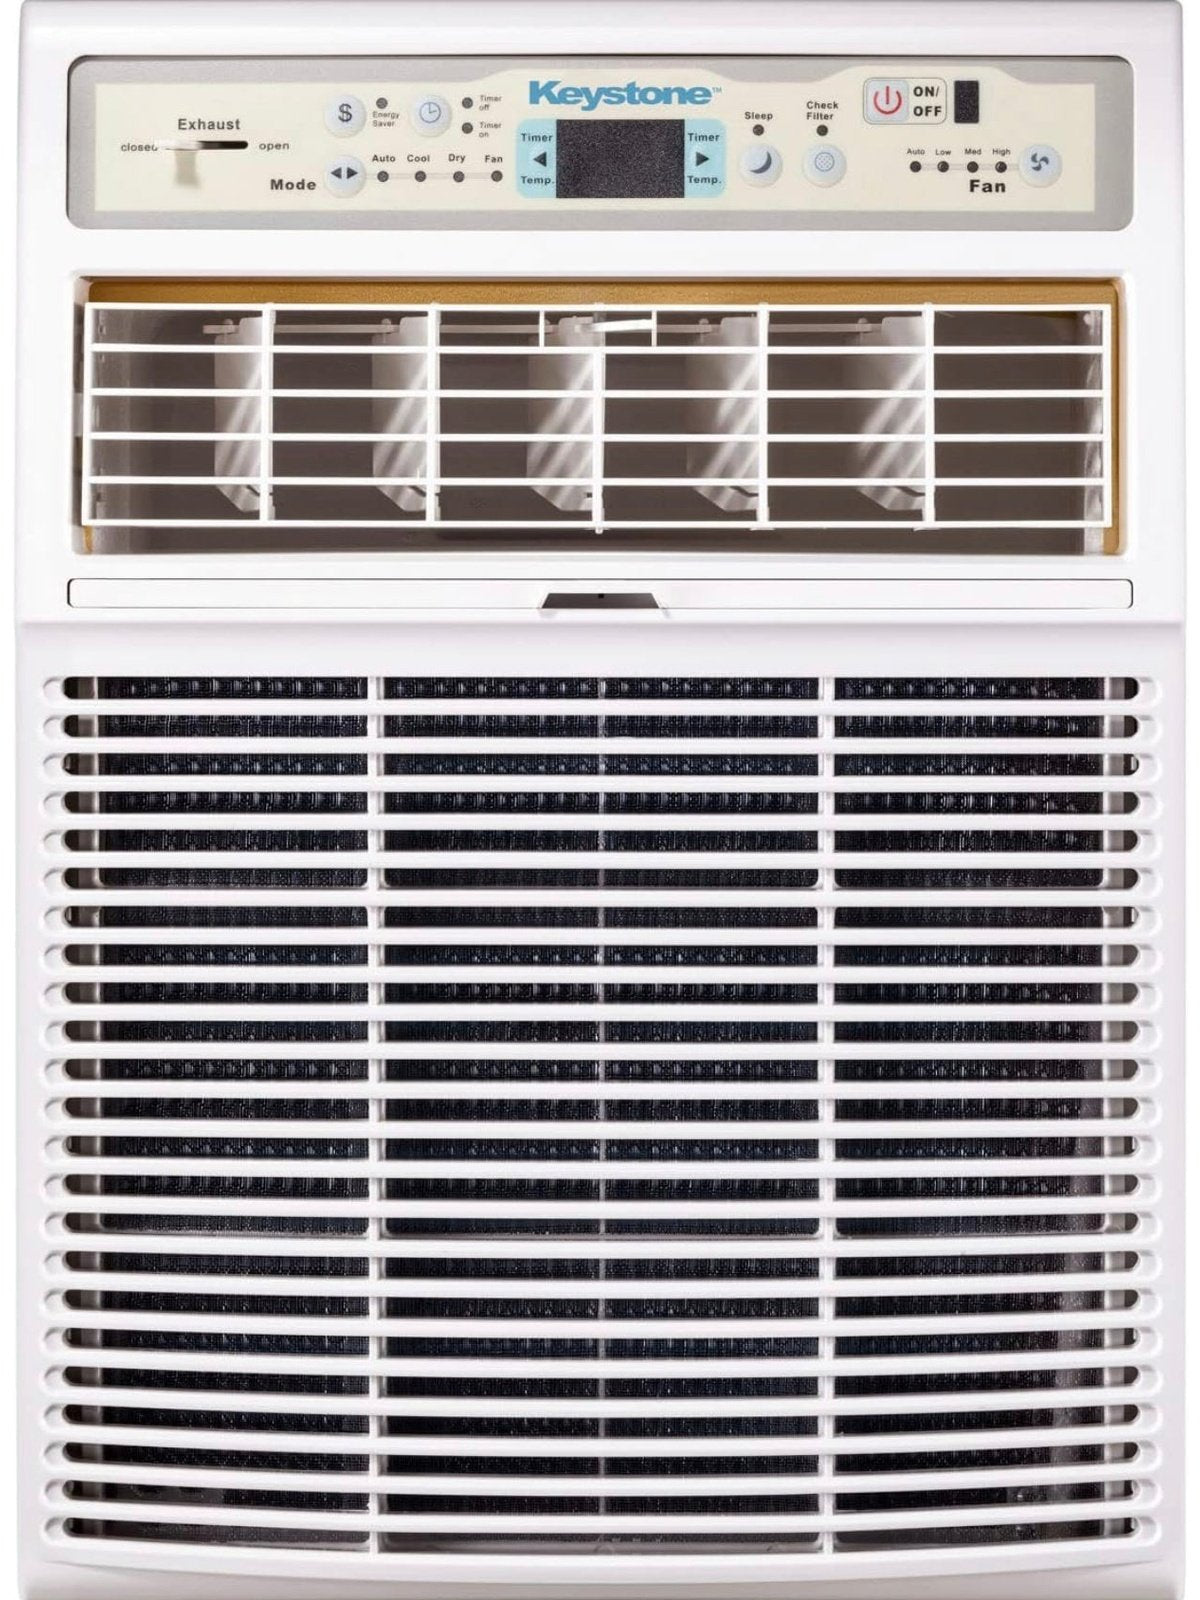 Keystone 10,000 BTU Slider Casement Window-Wall Air Conditioner and Dehumidifier with 4-Way Air Direction Control, Window AC Unit for Bedroom, Living Room, Small-Medium Sized Rooms up to 450 Sq.Ft